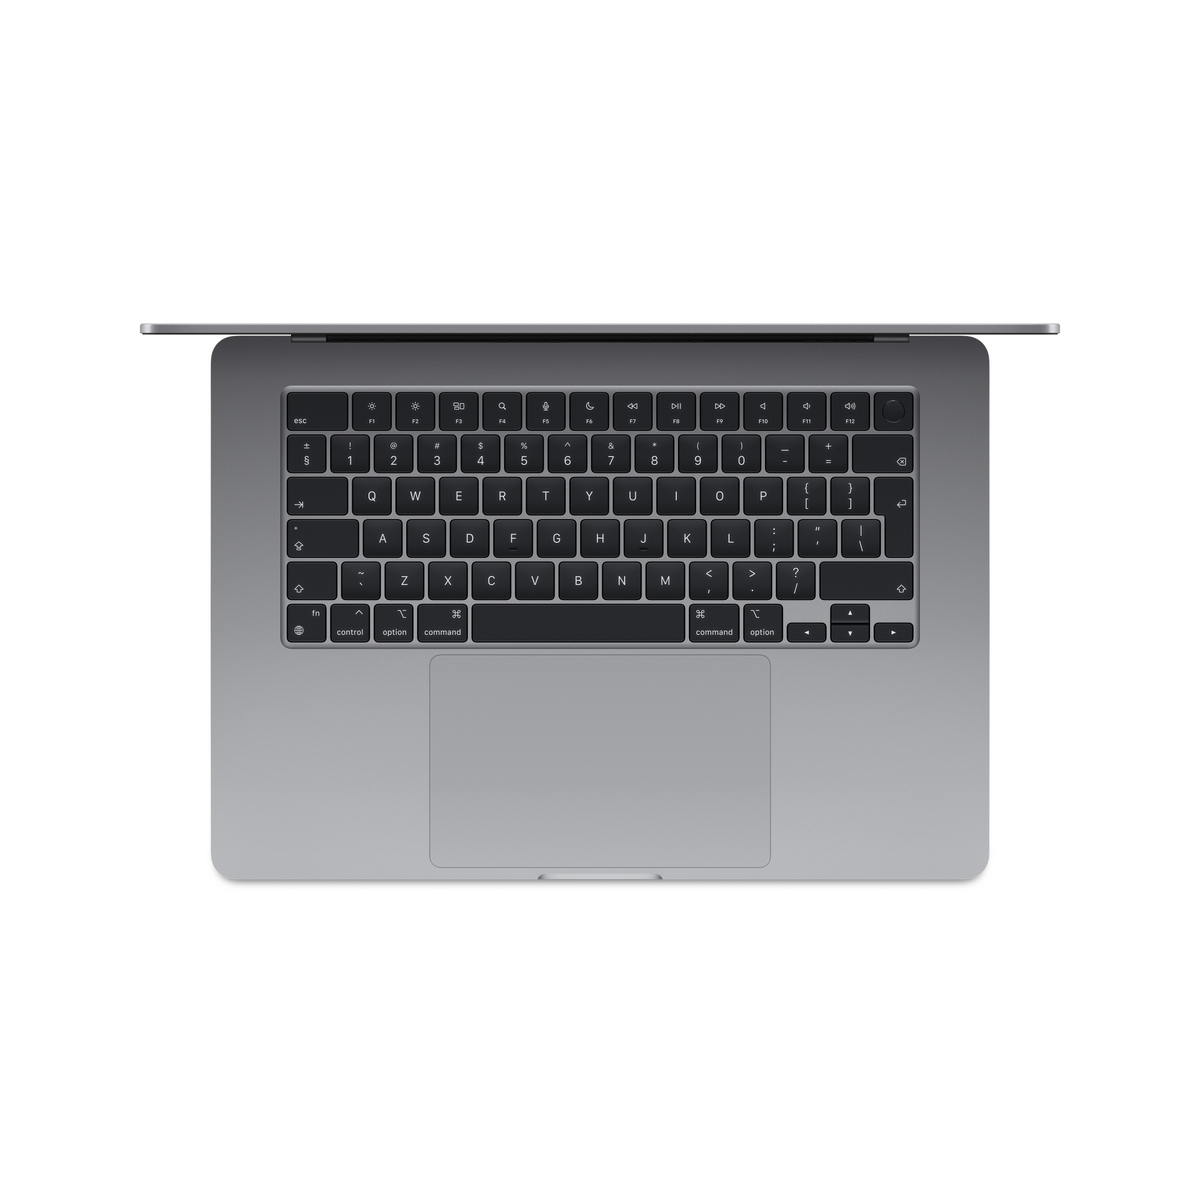 Apple MacBook Air, 15 inches, 8 GB RAM, 512 GB SSD, Apple M3 chip with 8-core CPU and 10-core GPU, macOS, Arabic, Space Grey